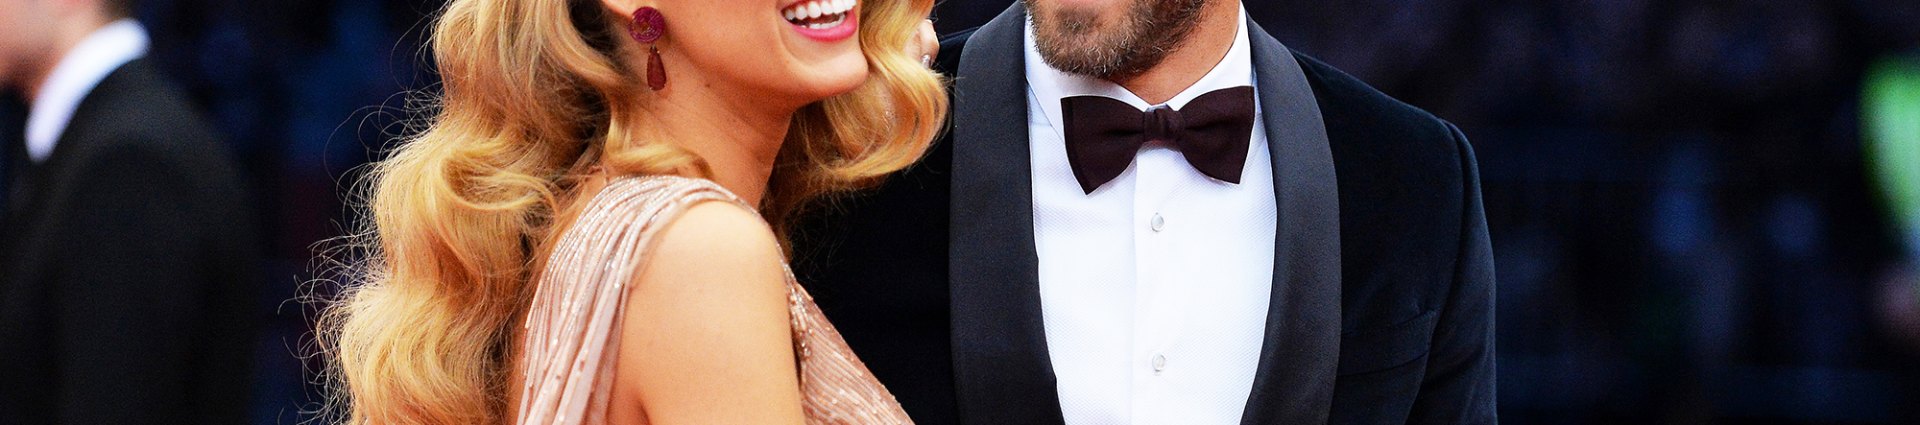 Ryan Reynolds Jokes That Blake Lively Is the Woman Who Had Sex With 20 Ghosts